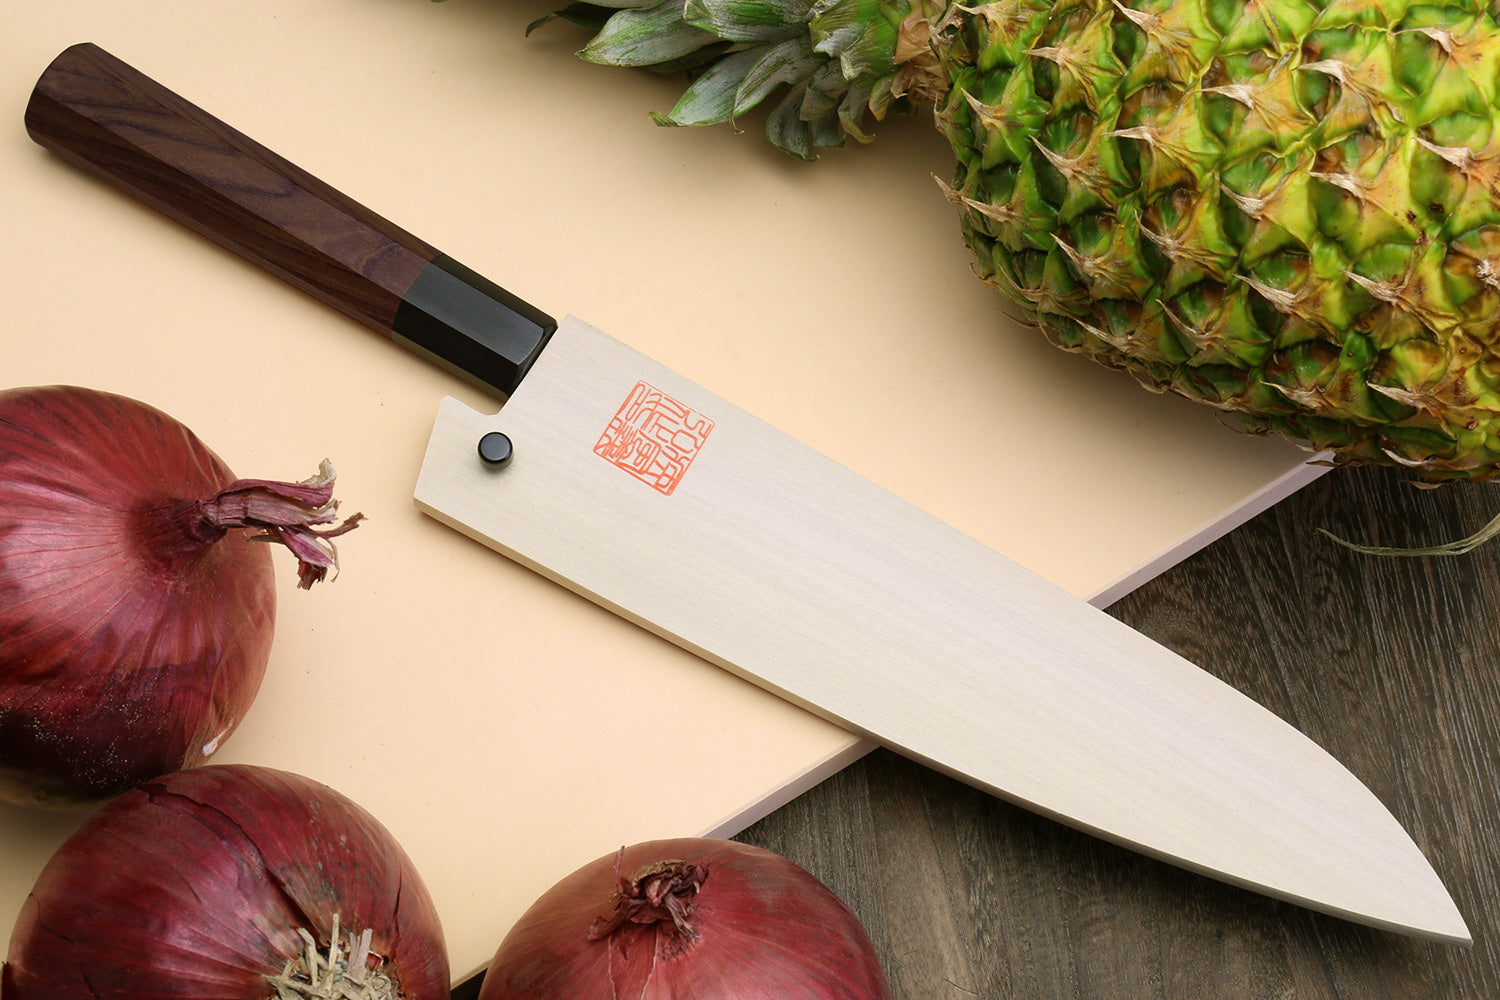 COMMERCIAL SERIES) BUTCHER KNIFE